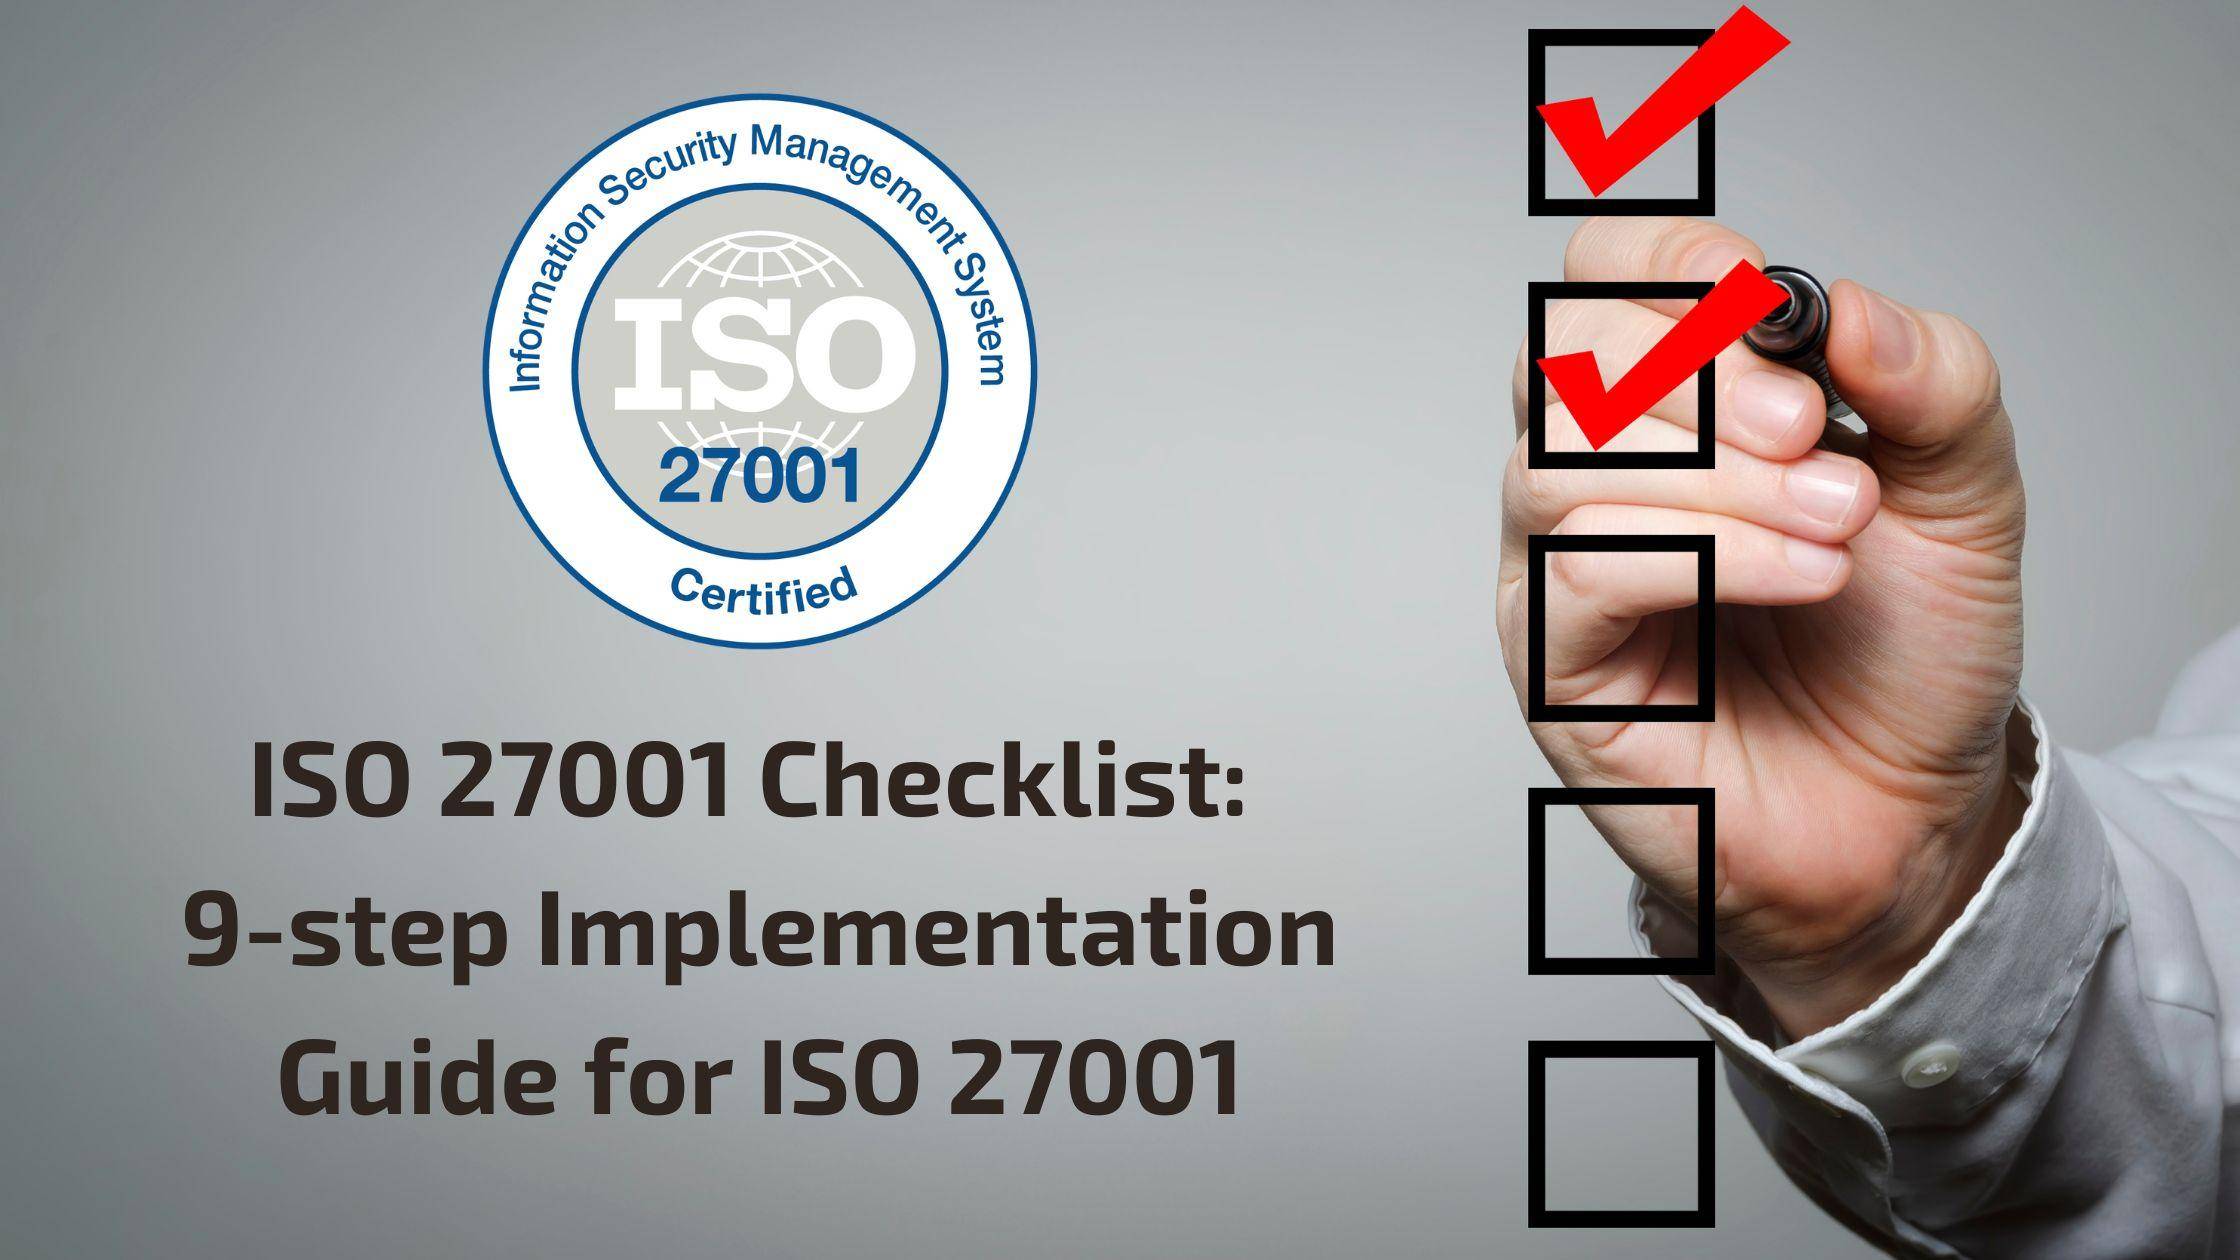 ISO 27001 Checklist: 9-step Implementation Guide